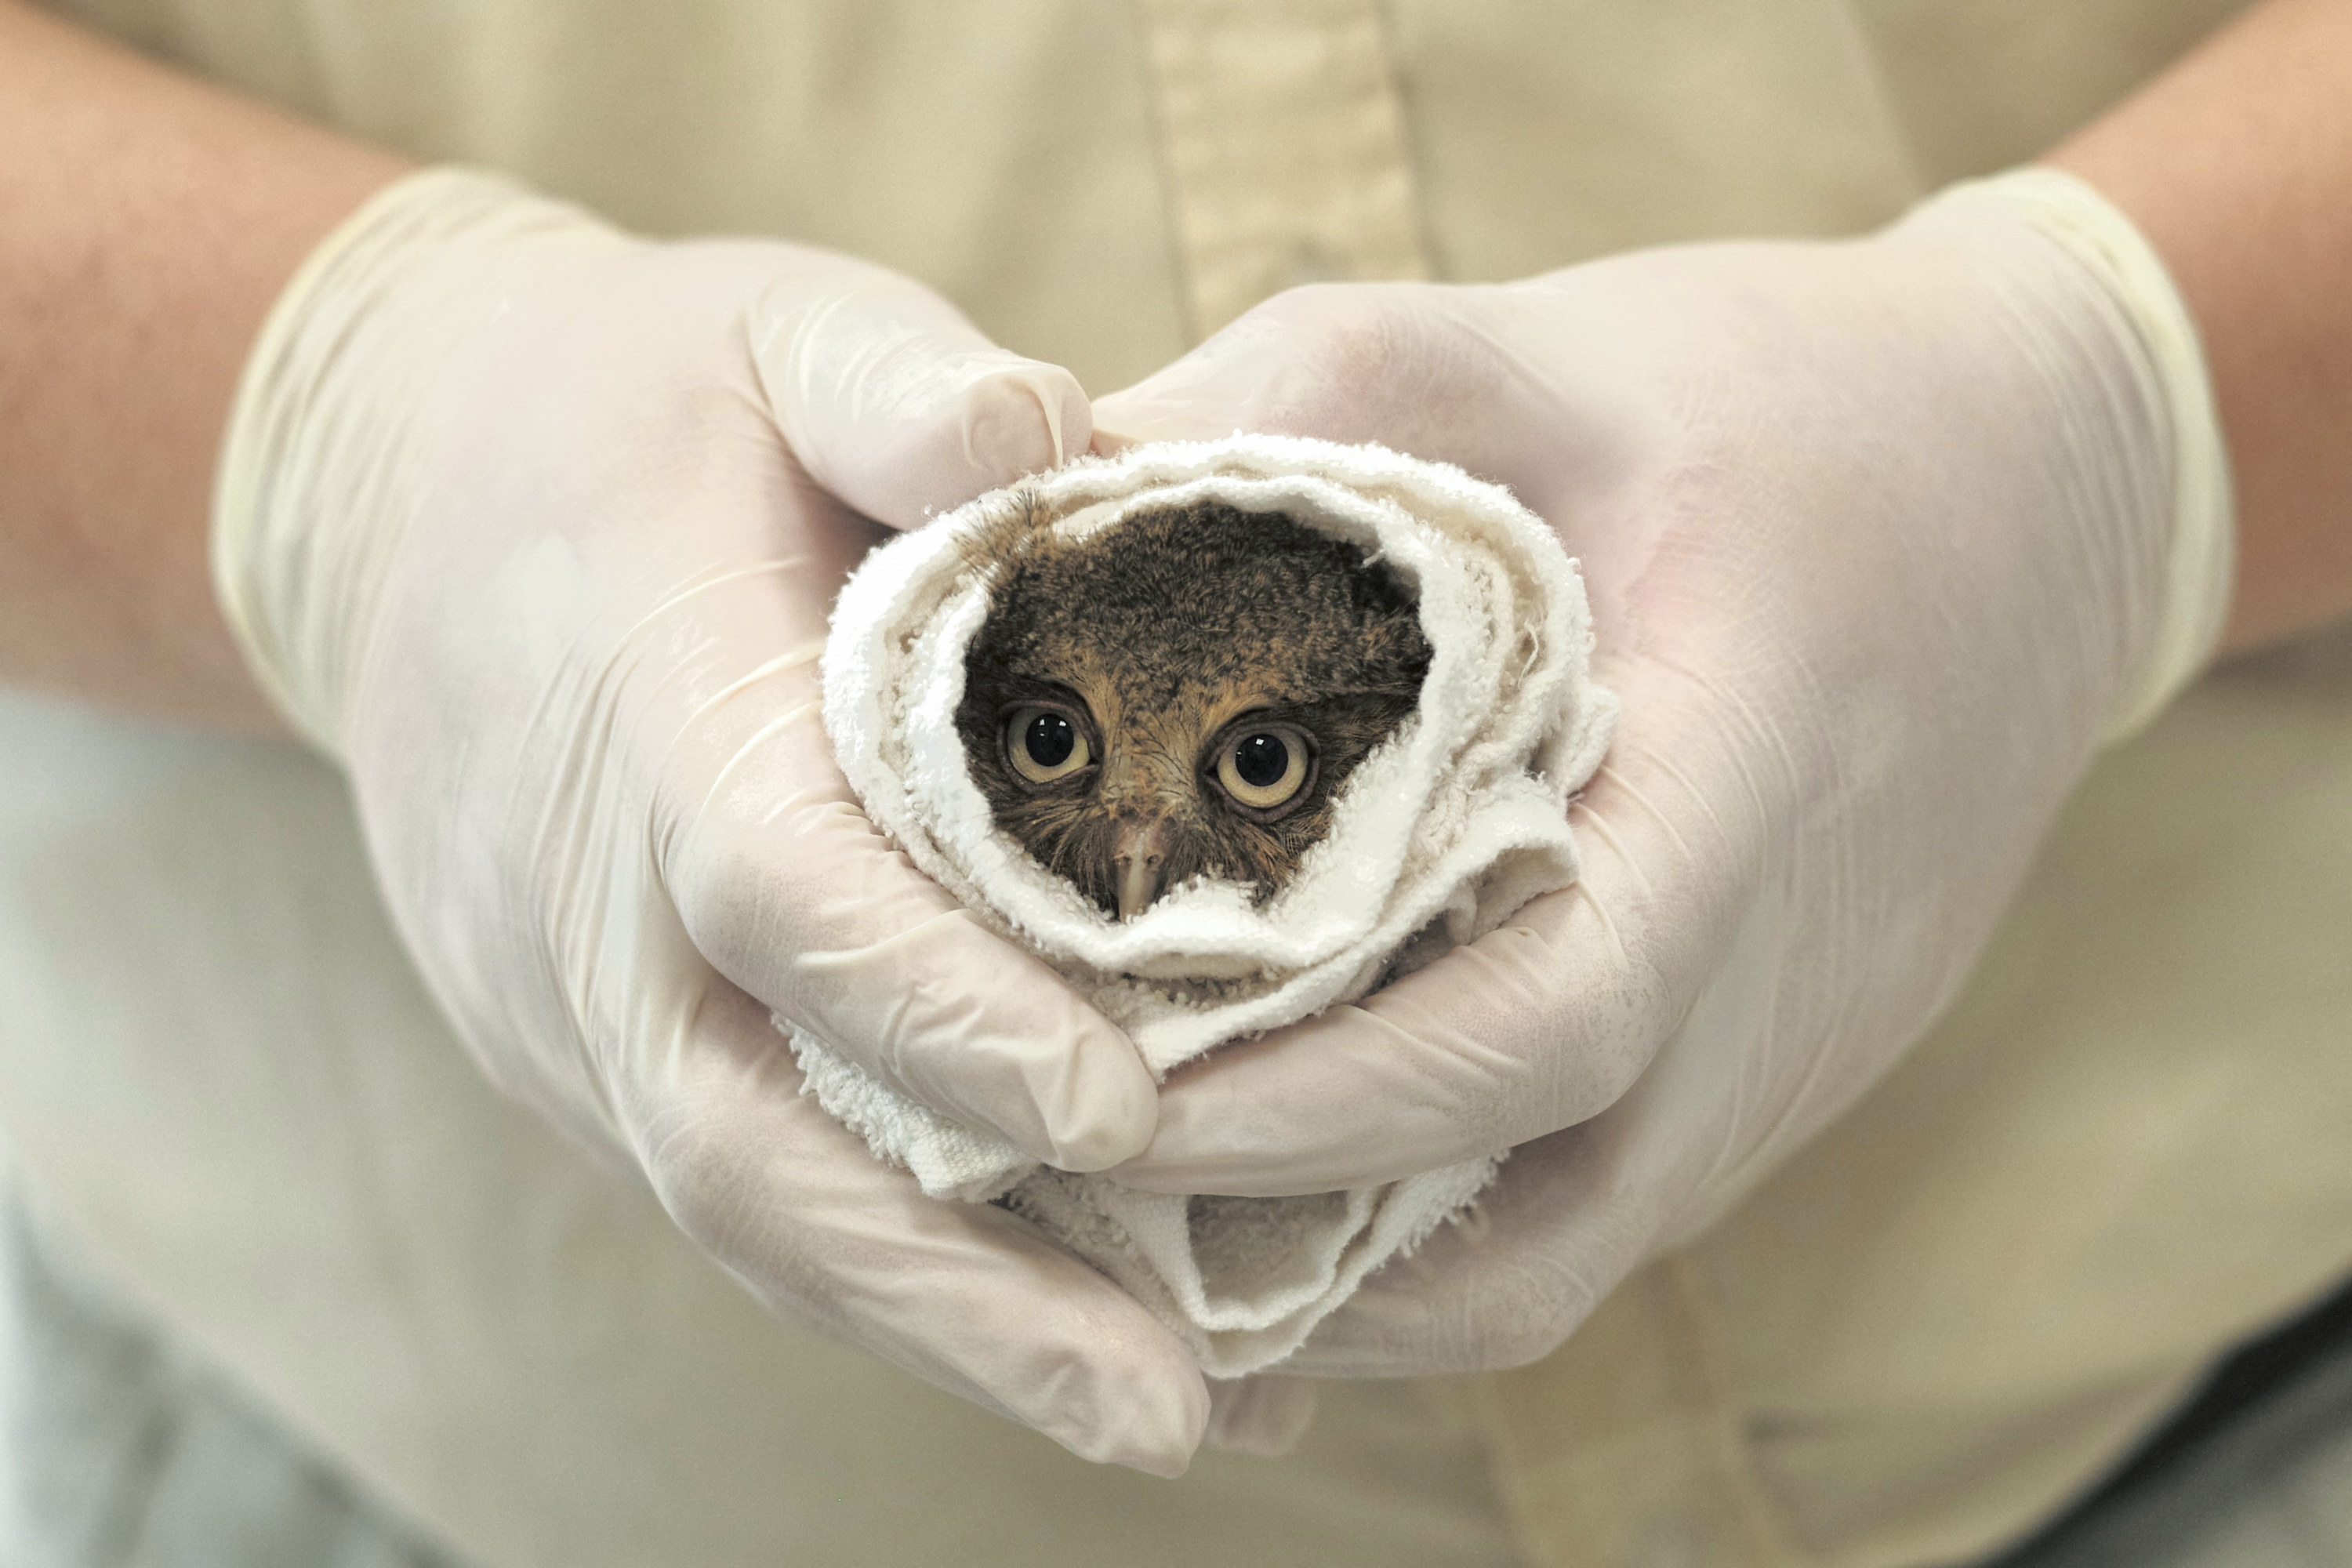 A baby mountain scops owl is wrapped in a cloth while a member of the staff checks on its health.